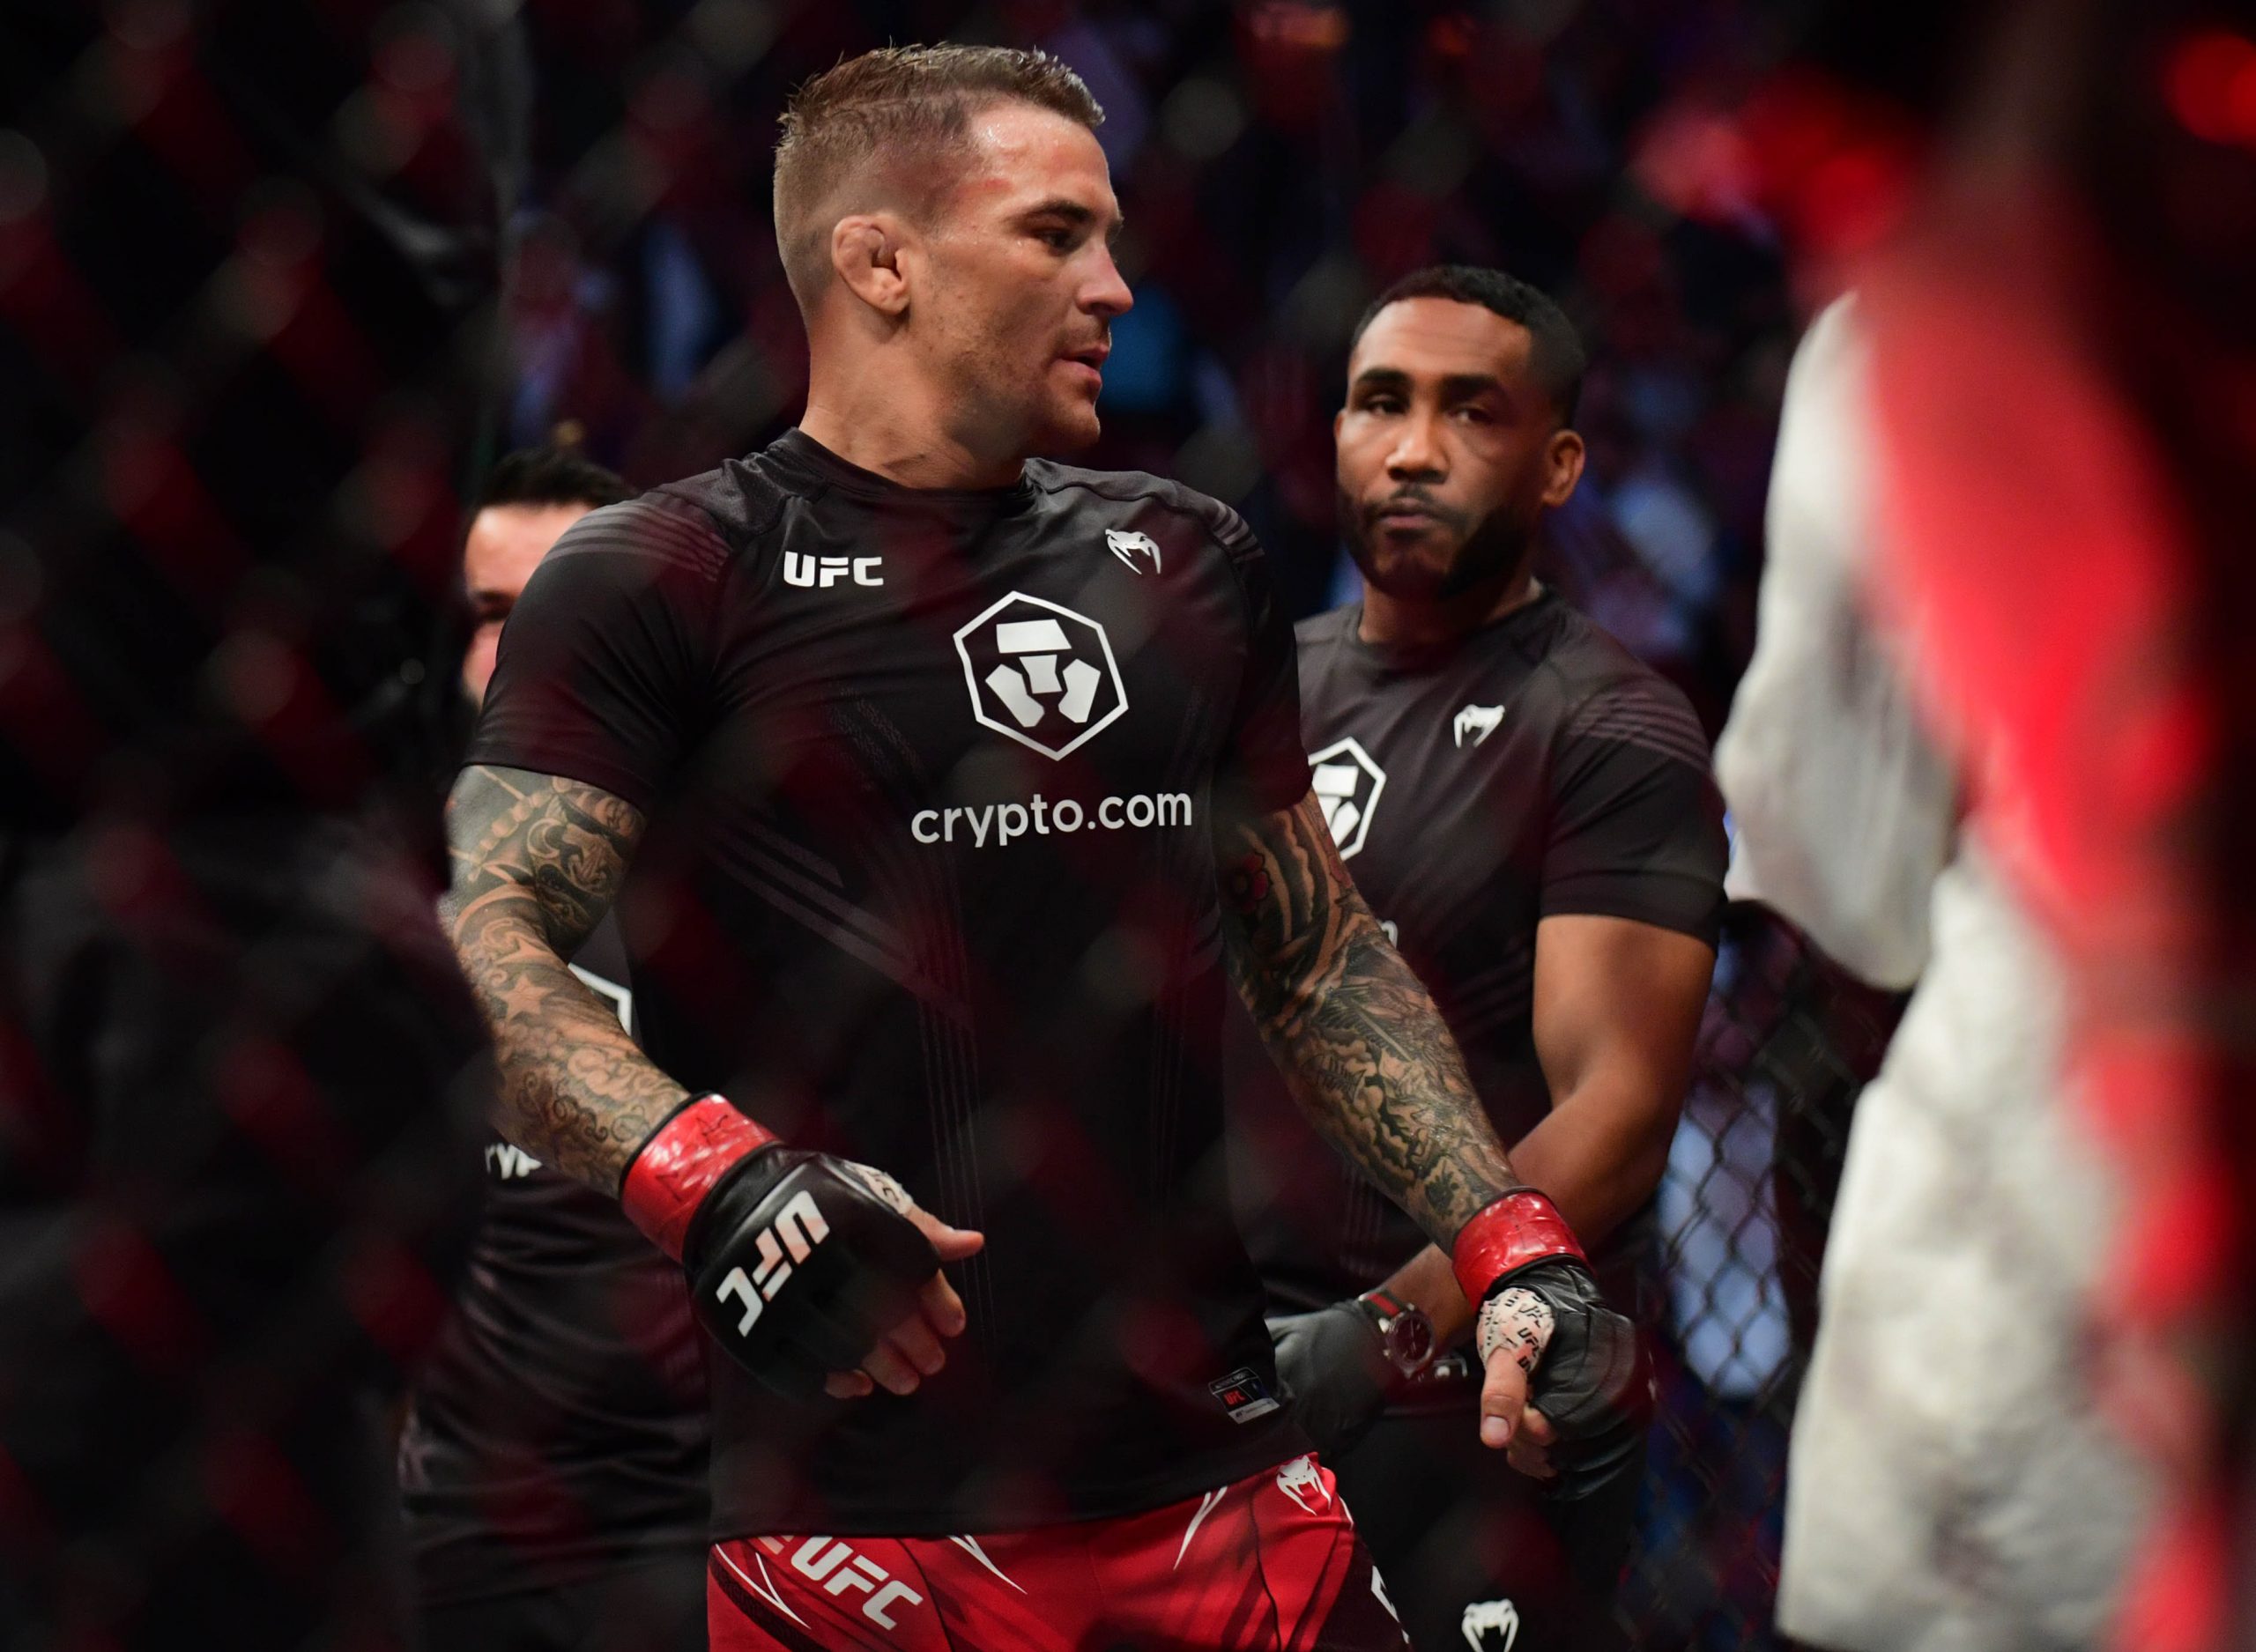 Jul 10, 2021; Las Vegas, Nevada, USA; Dustin Poirier following his victory against Conor McGregor during UFC 264 at T-Mobile Arena.